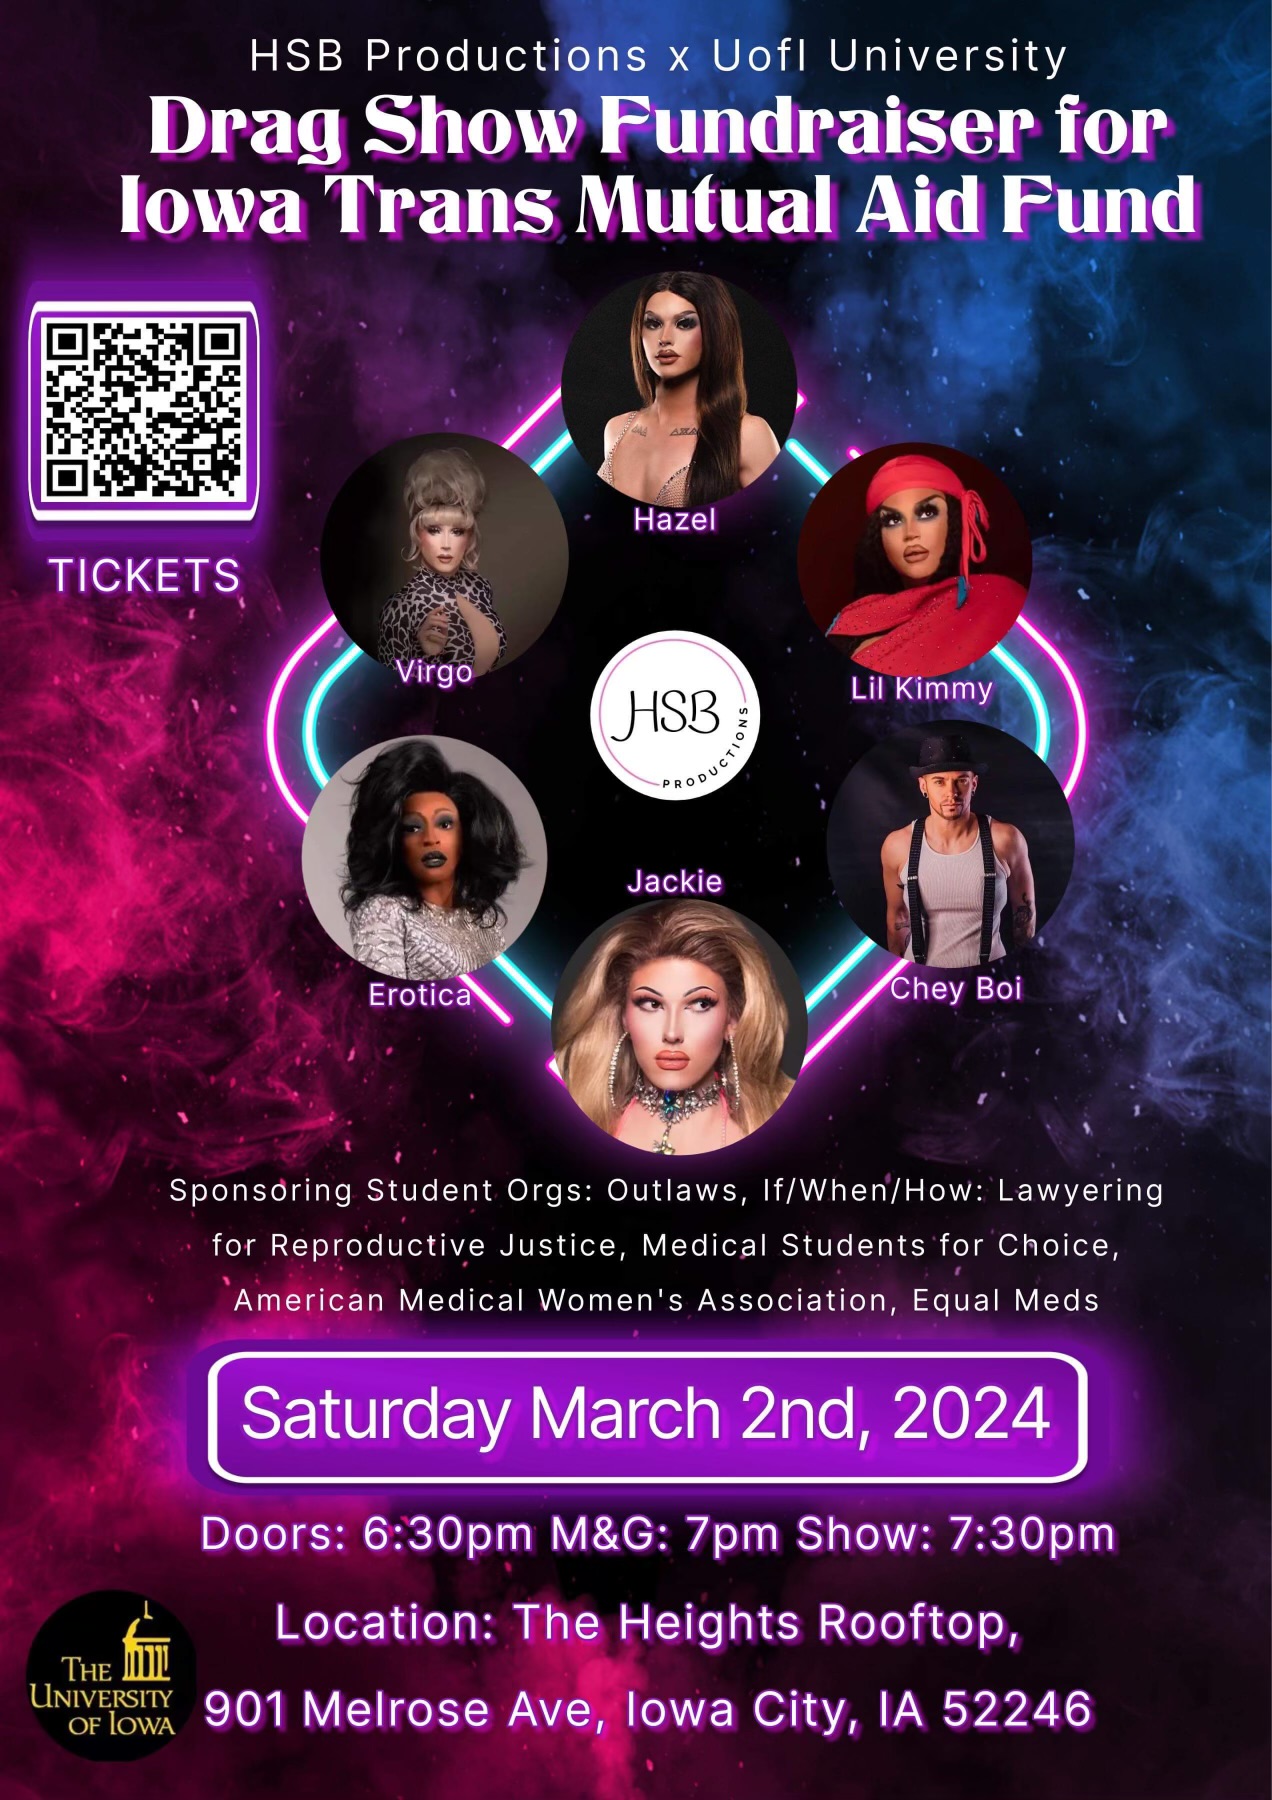 HSB Productions x UofI University    Drag Show Fundraiser for Iowa Trans Mutual Aid Fund    Sponsoring Student Orgs: Outlaws, If/When/How: Lawyering for Reproductive Justice, Medical Students for Choice, American Medical Women's Association, Equal Meds   